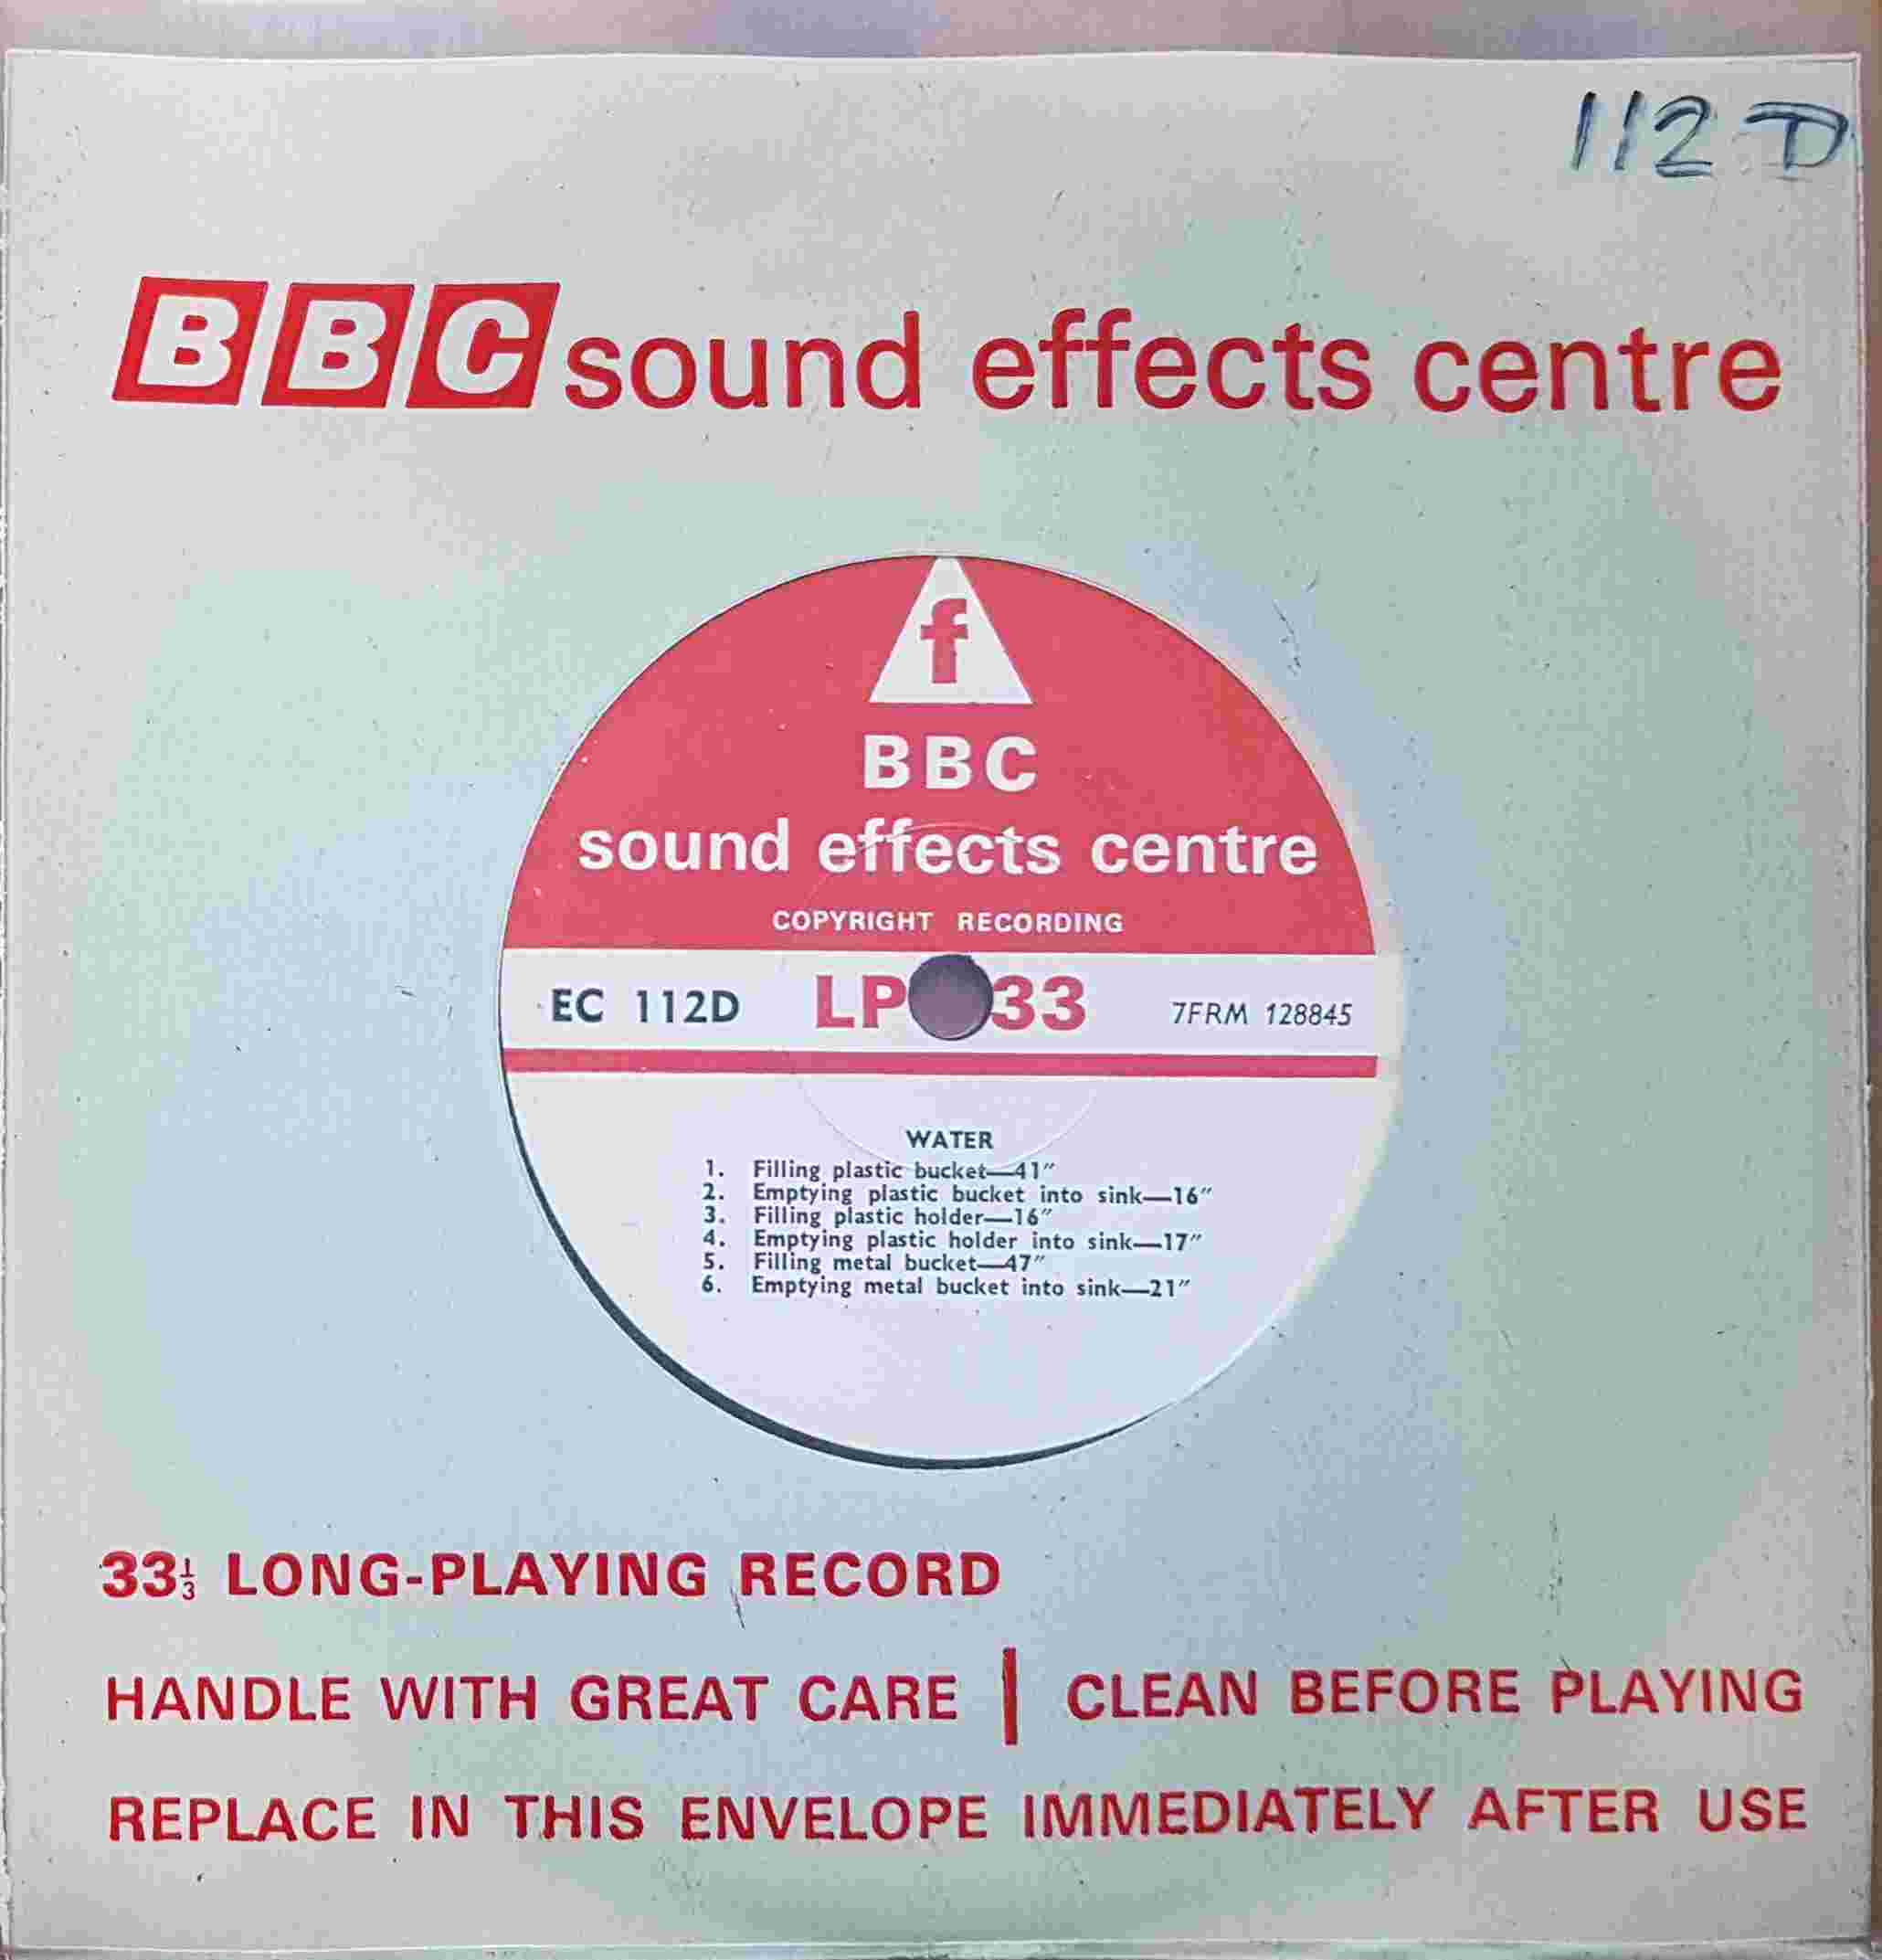 Picture of EC 112D Water by artist Not registered from the BBC records and Tapes library